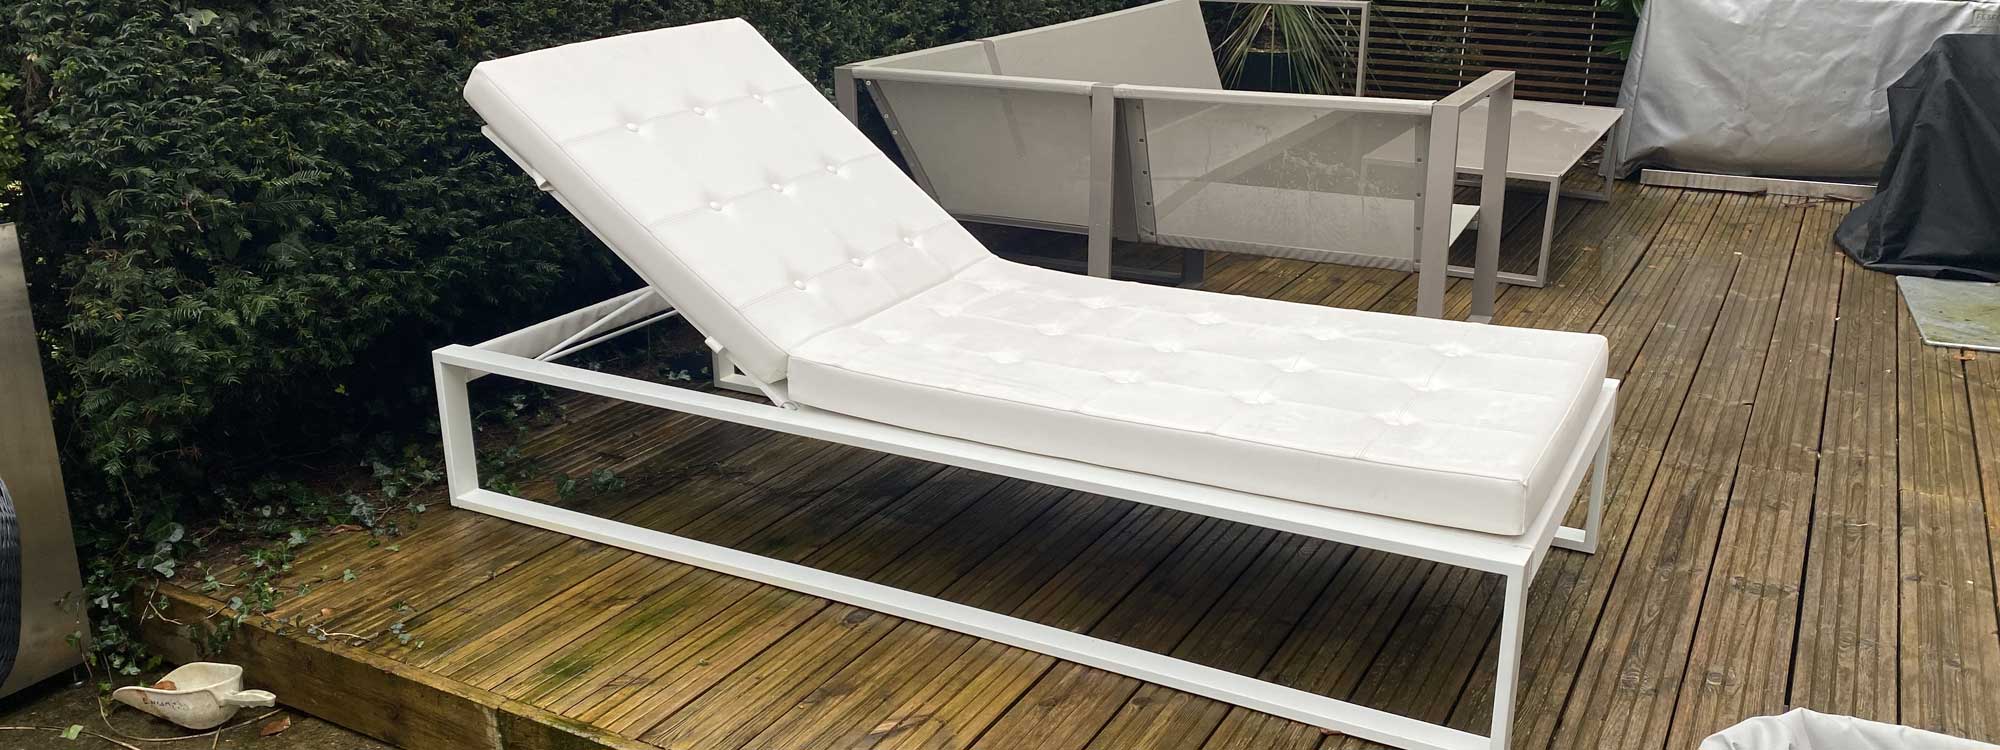 Image of FueraDentro Siesta sun lounger with white Buttoned cushion